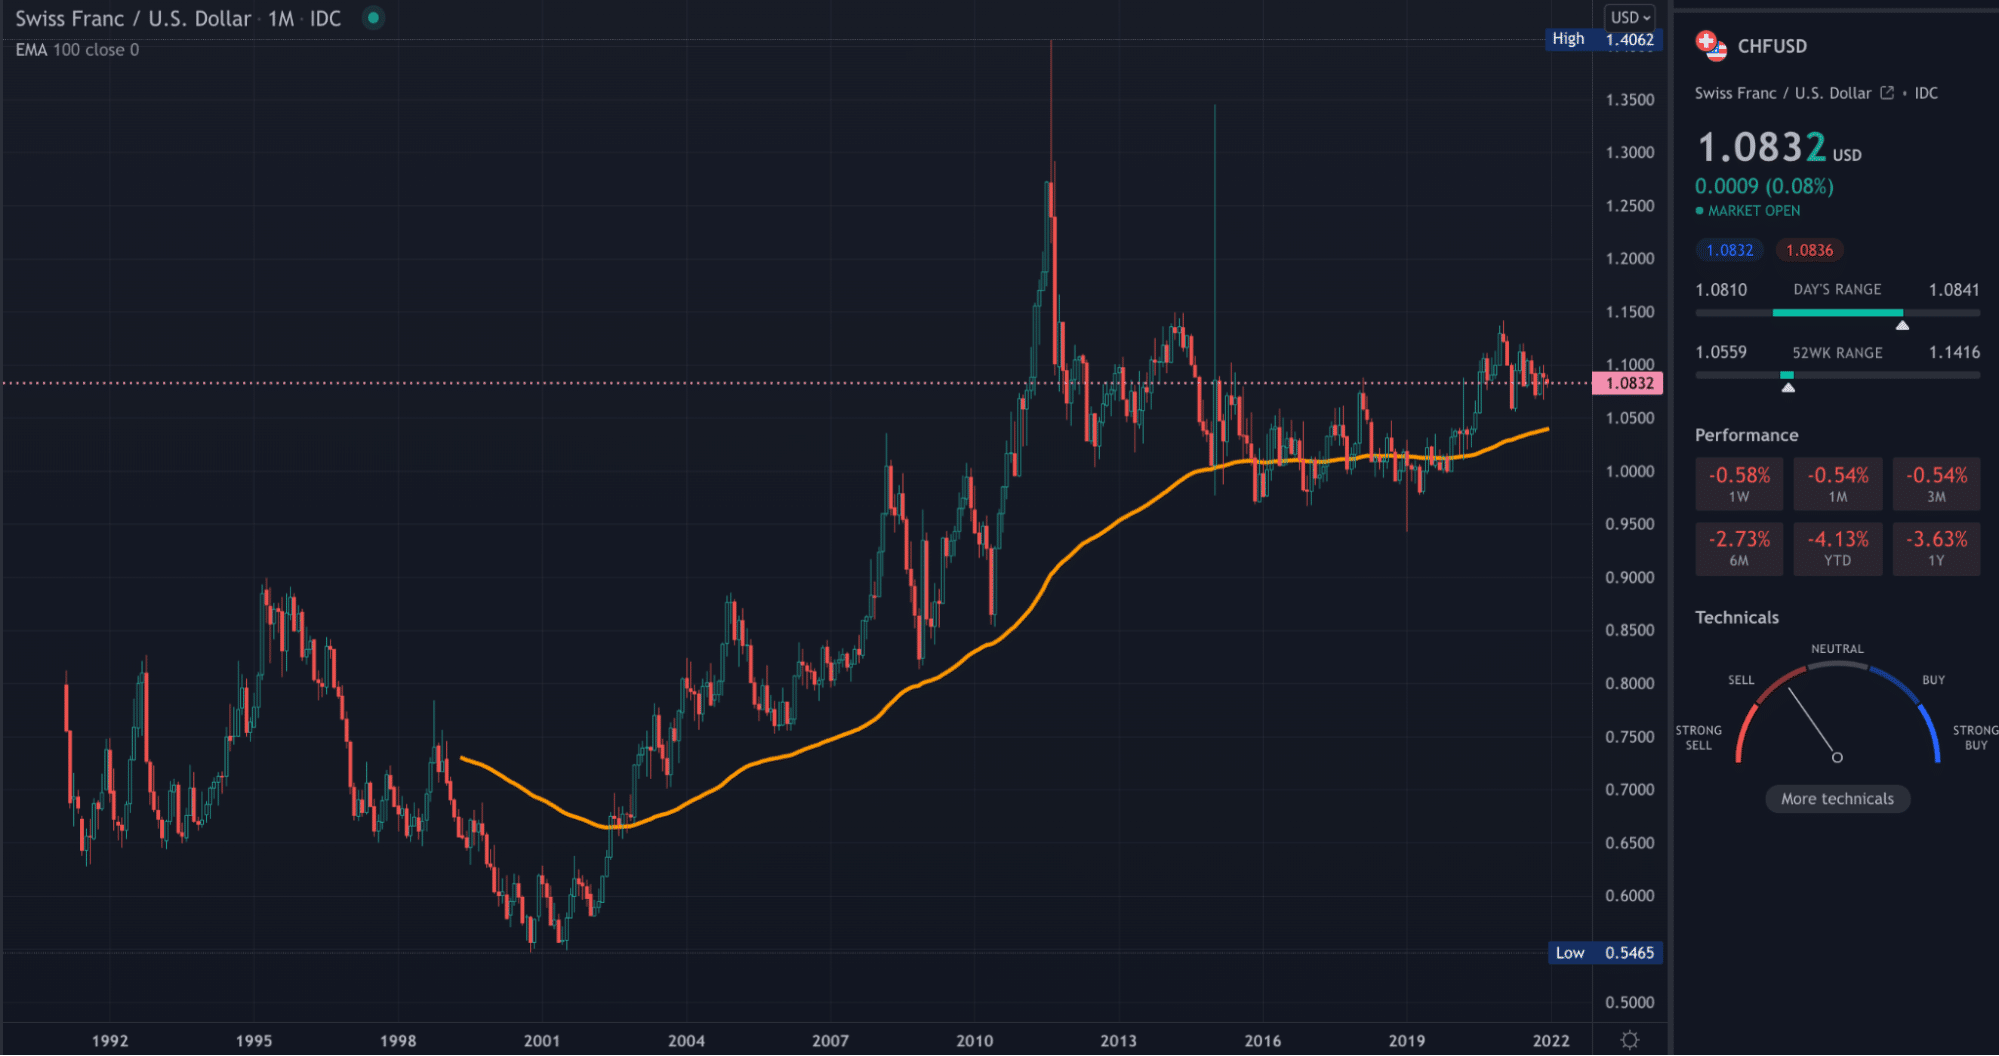 TradingView CHFUSD monthly chart